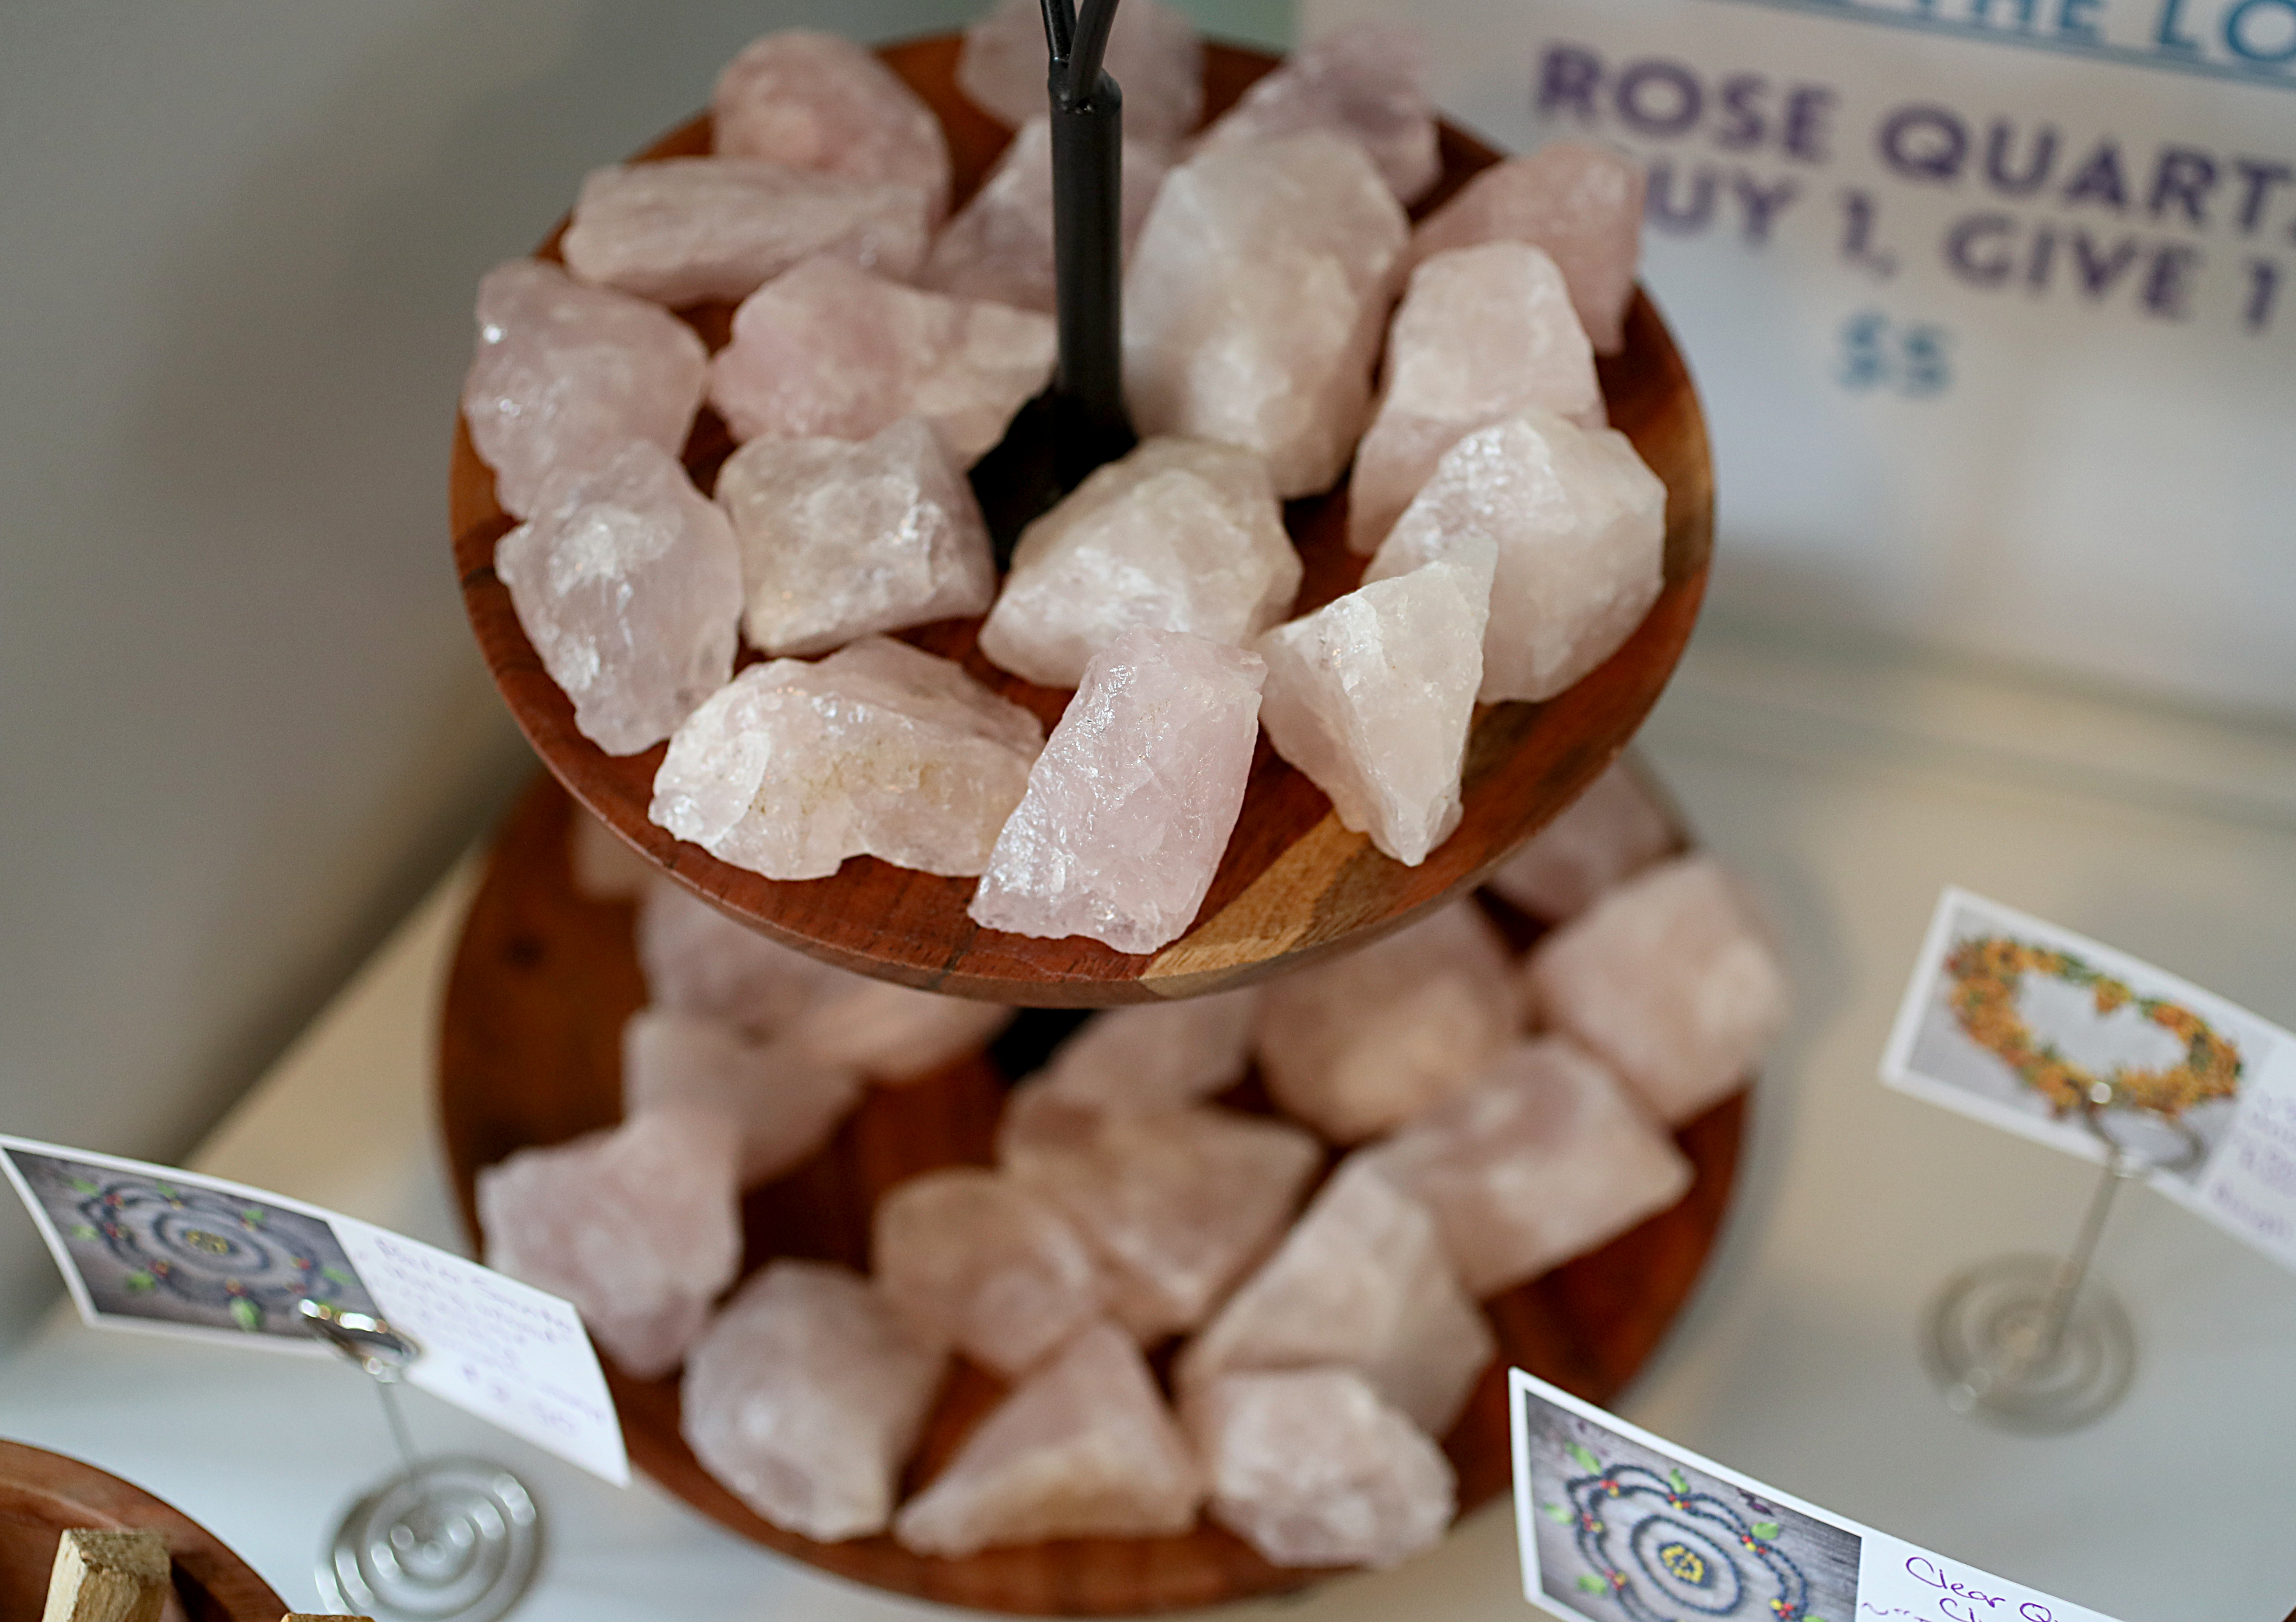 Rose Quartz for sale at the Thrive Tribe Cafe in Barrington.